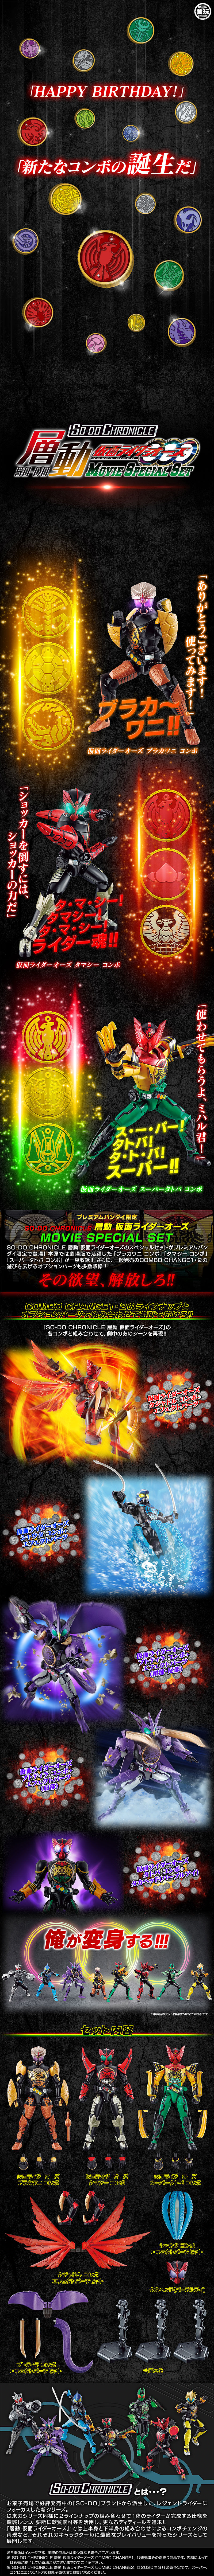 SO-DO CHRONICLE 層動 仮面ライダーオーズMOVIE SPECIAL SET